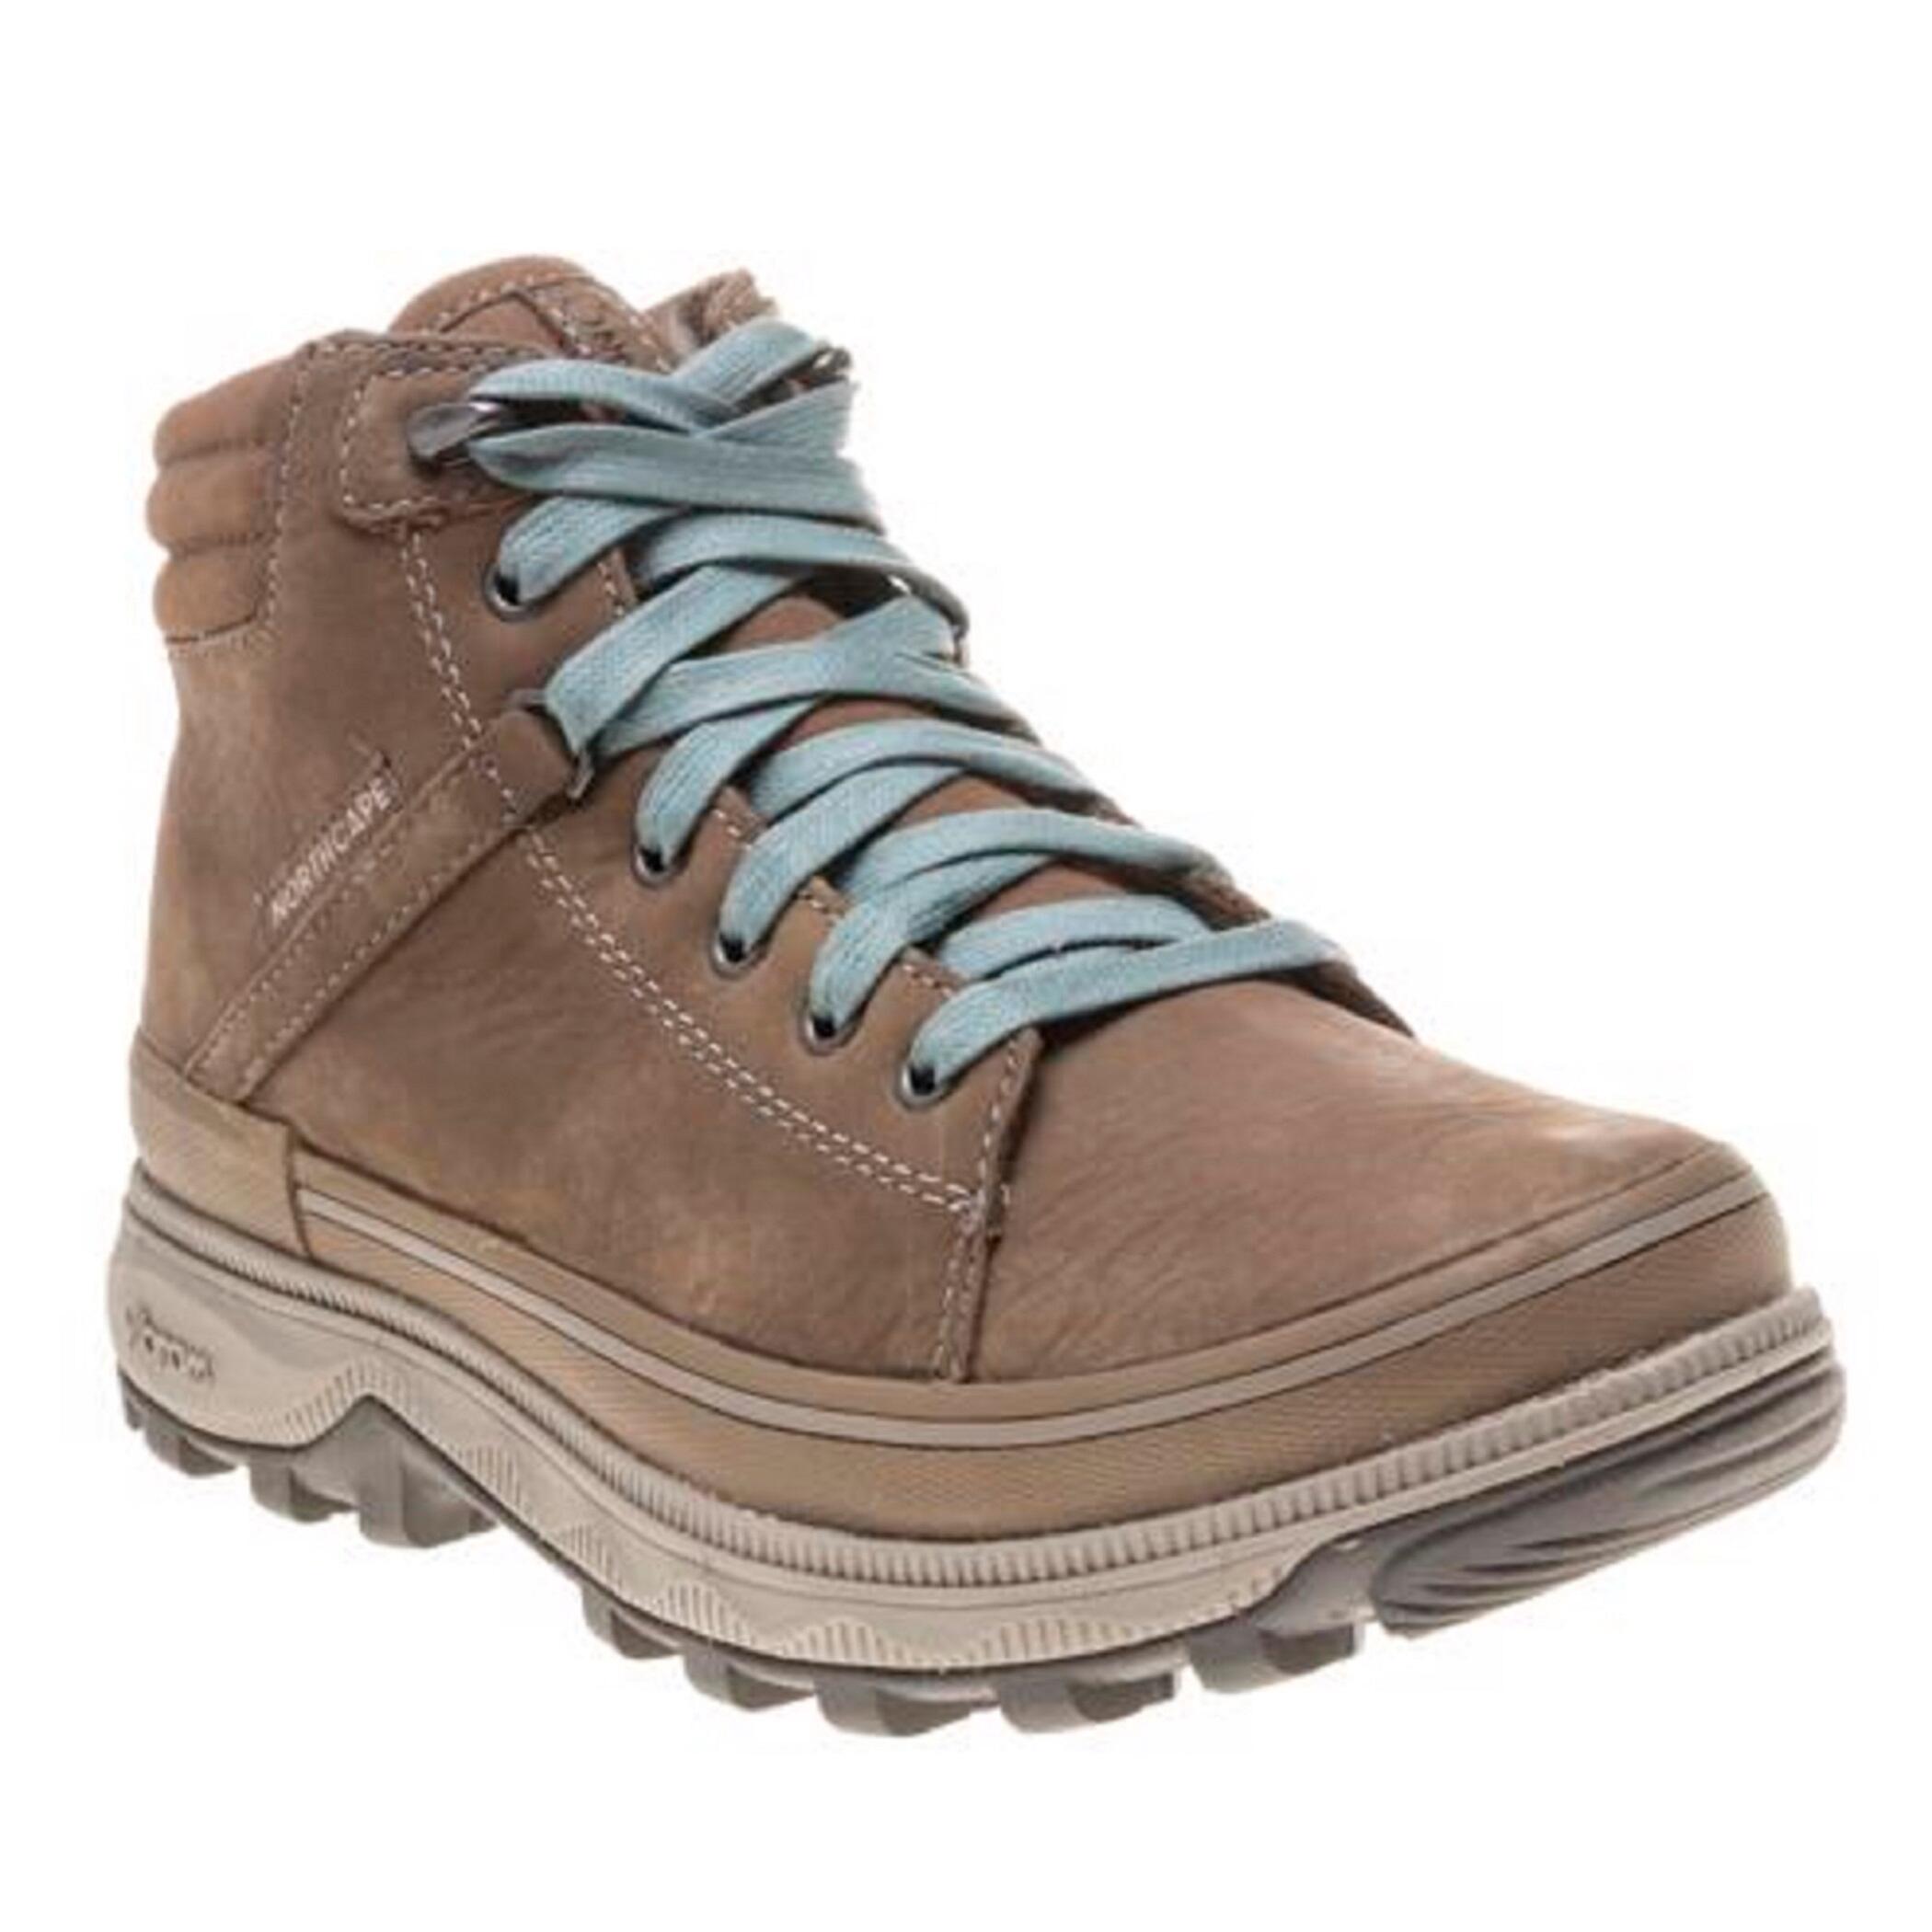 Women's walking boots - Northcape Shale - brown 1/5